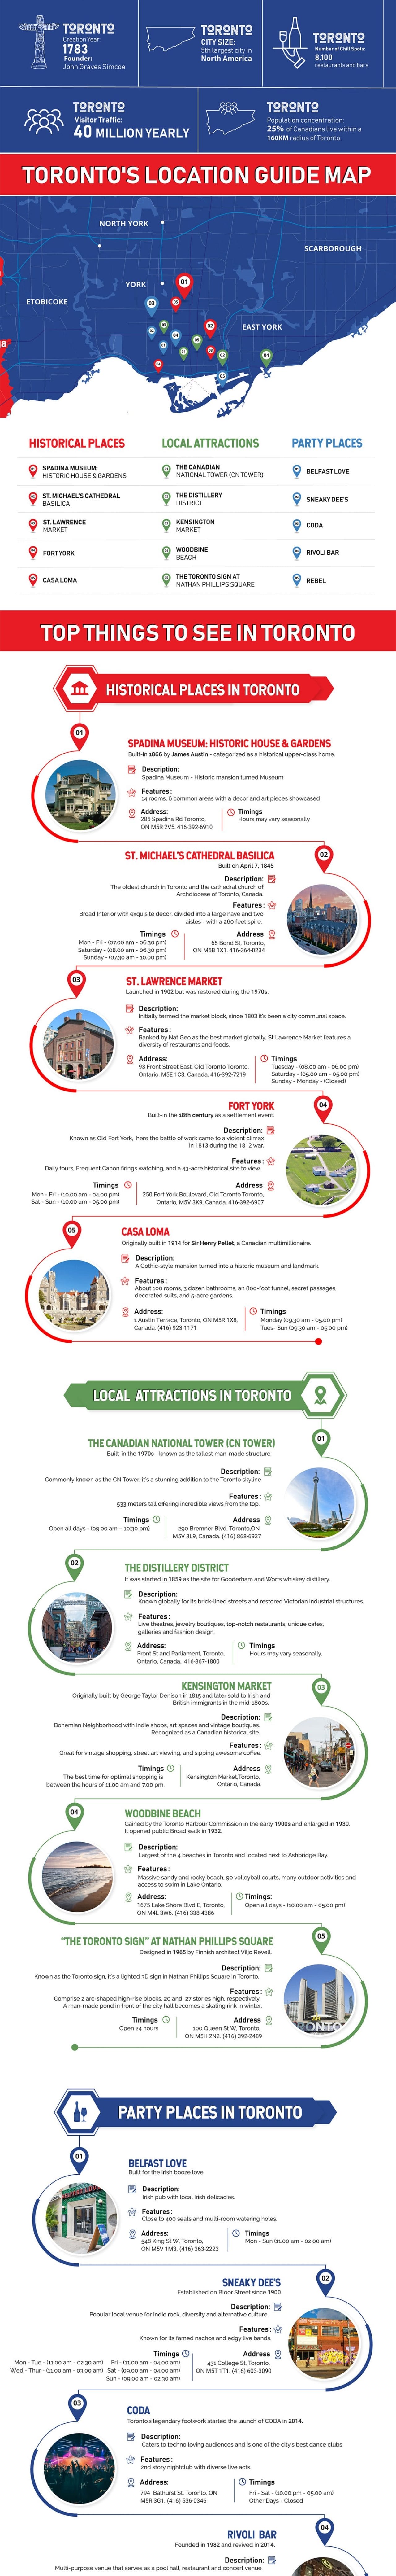 Places to visit in Toronto infographic